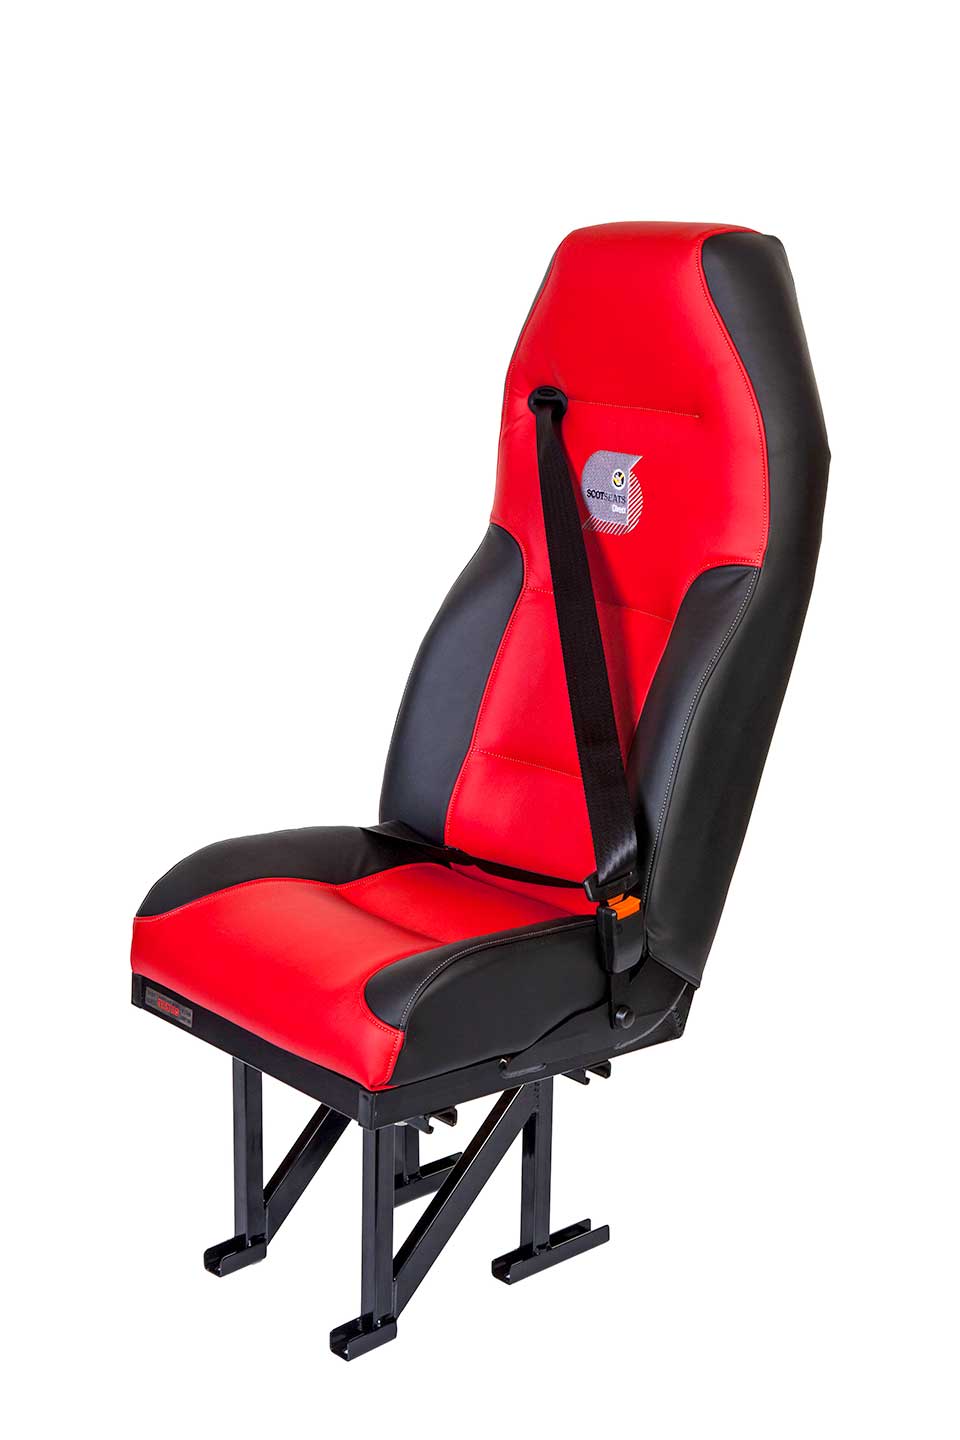 Red and black San Carlos Deluxe High back seat